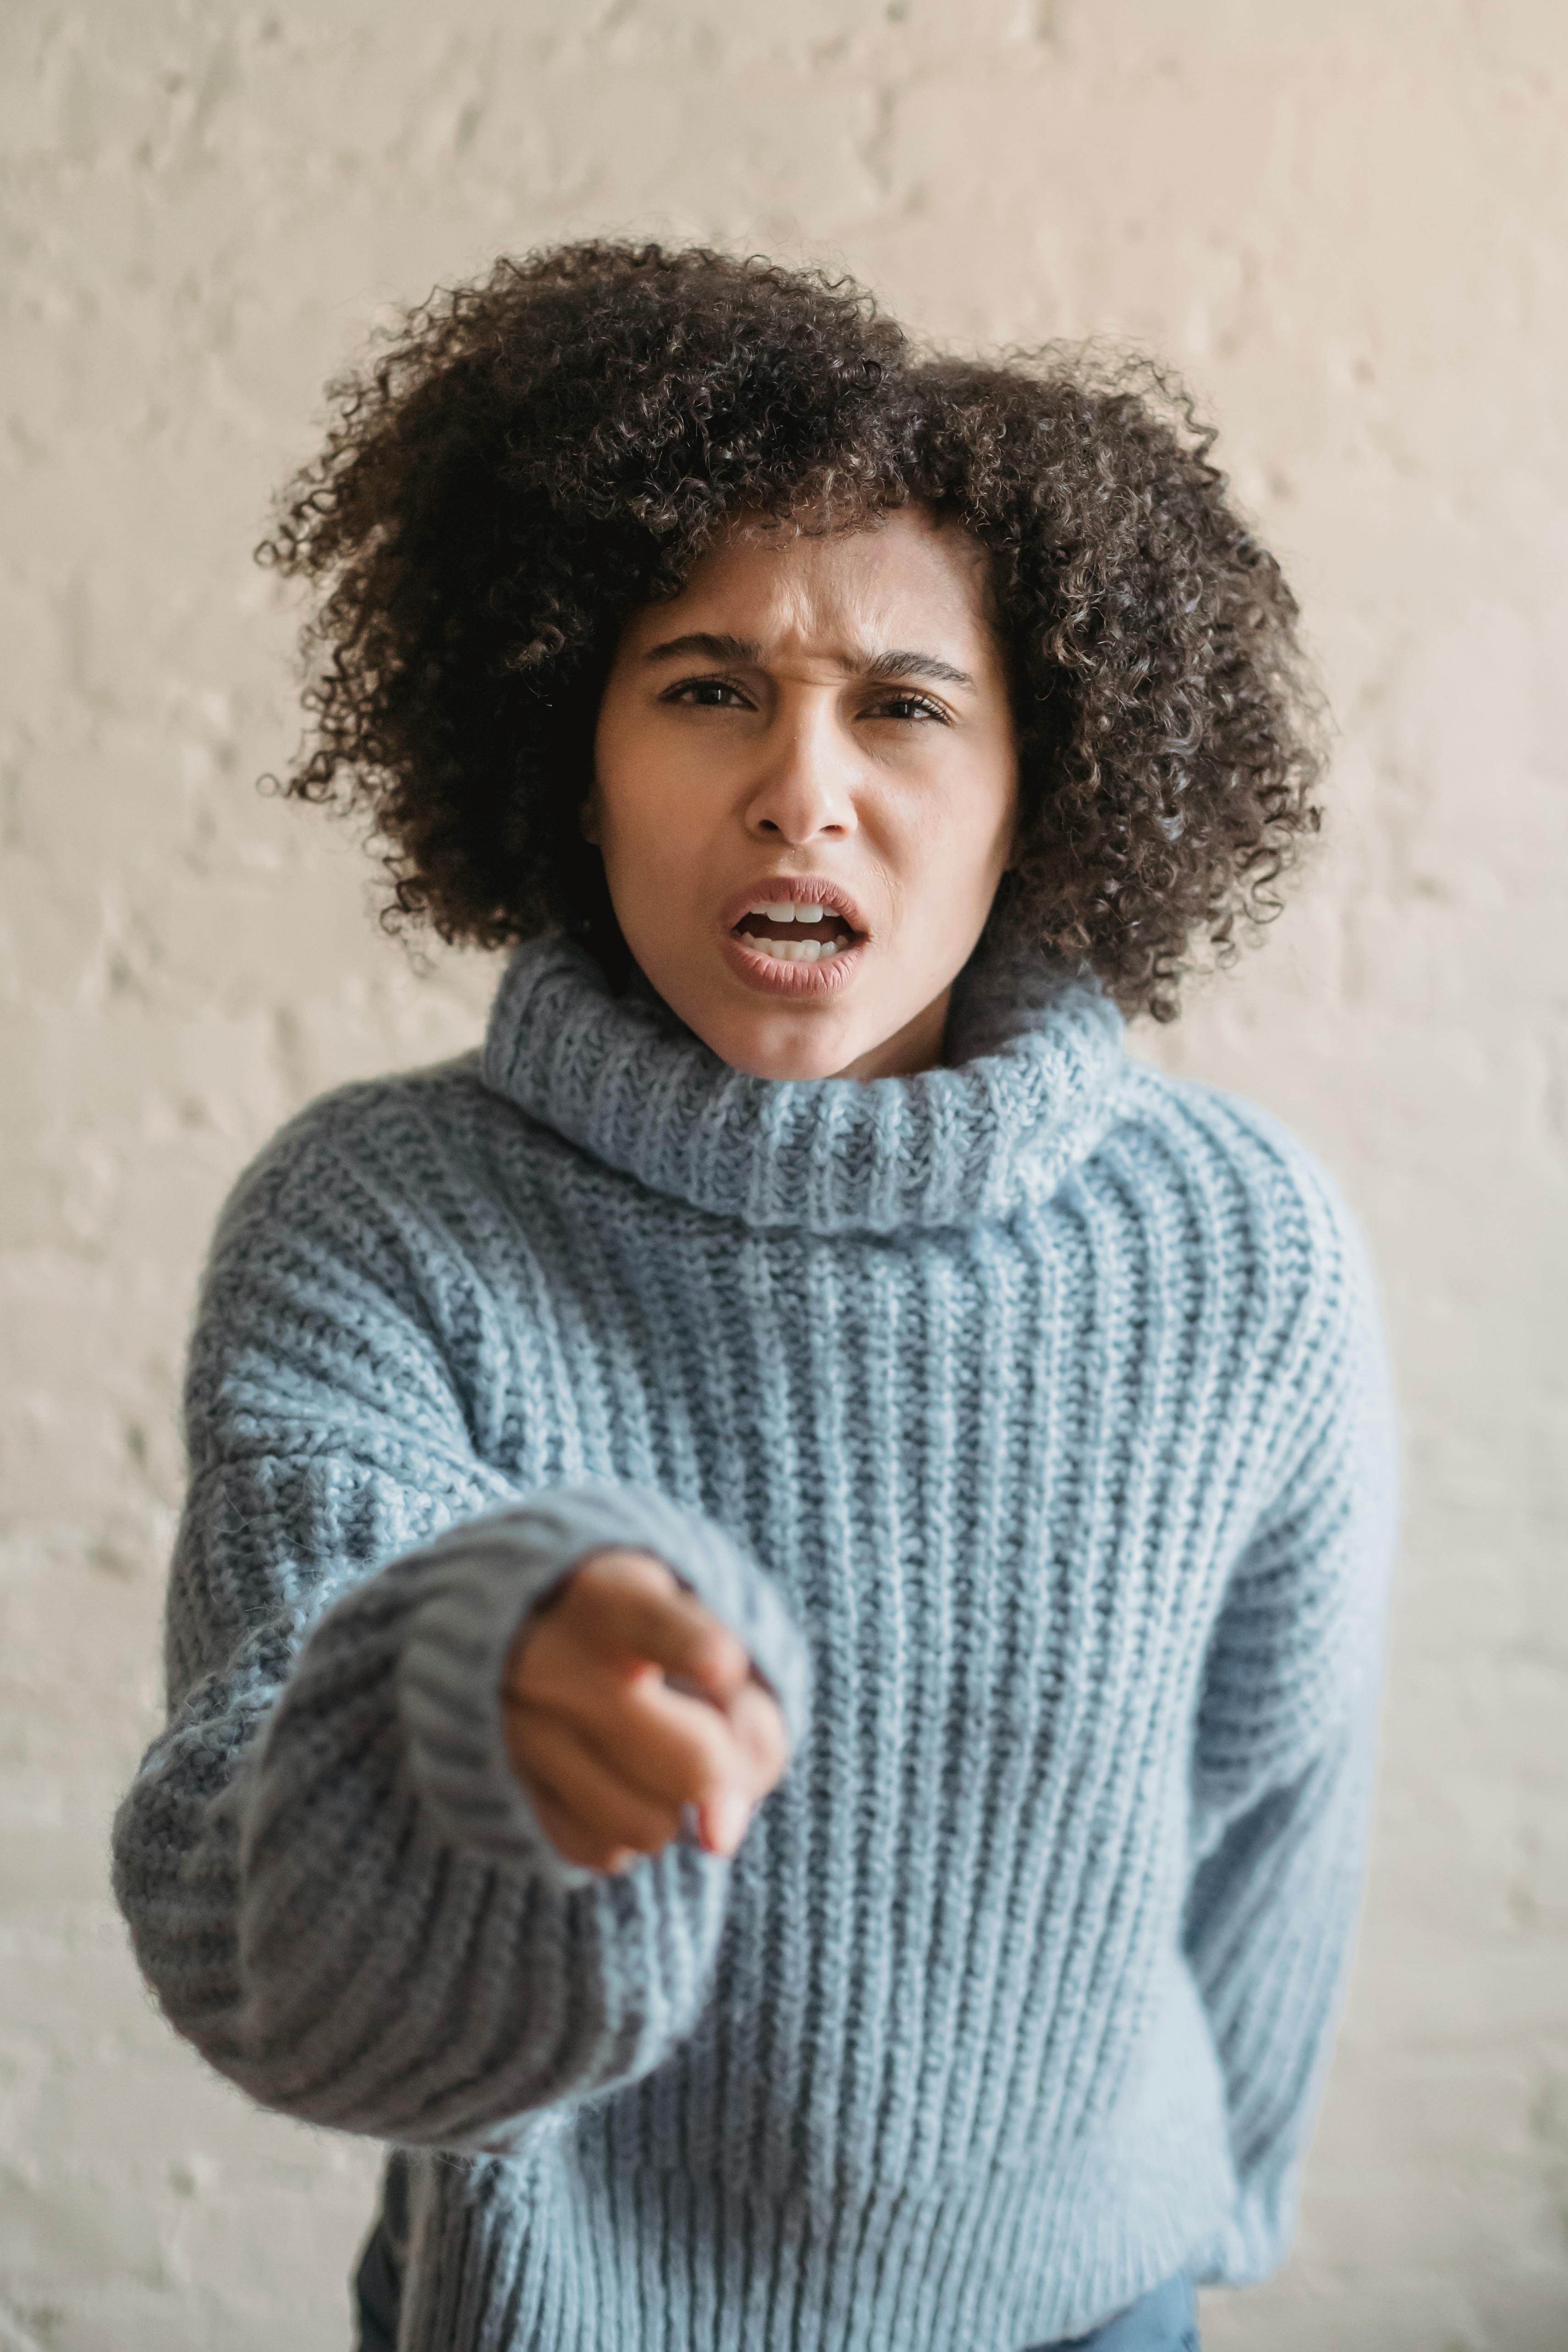 An annoyed woman pointing | Source: Pexels